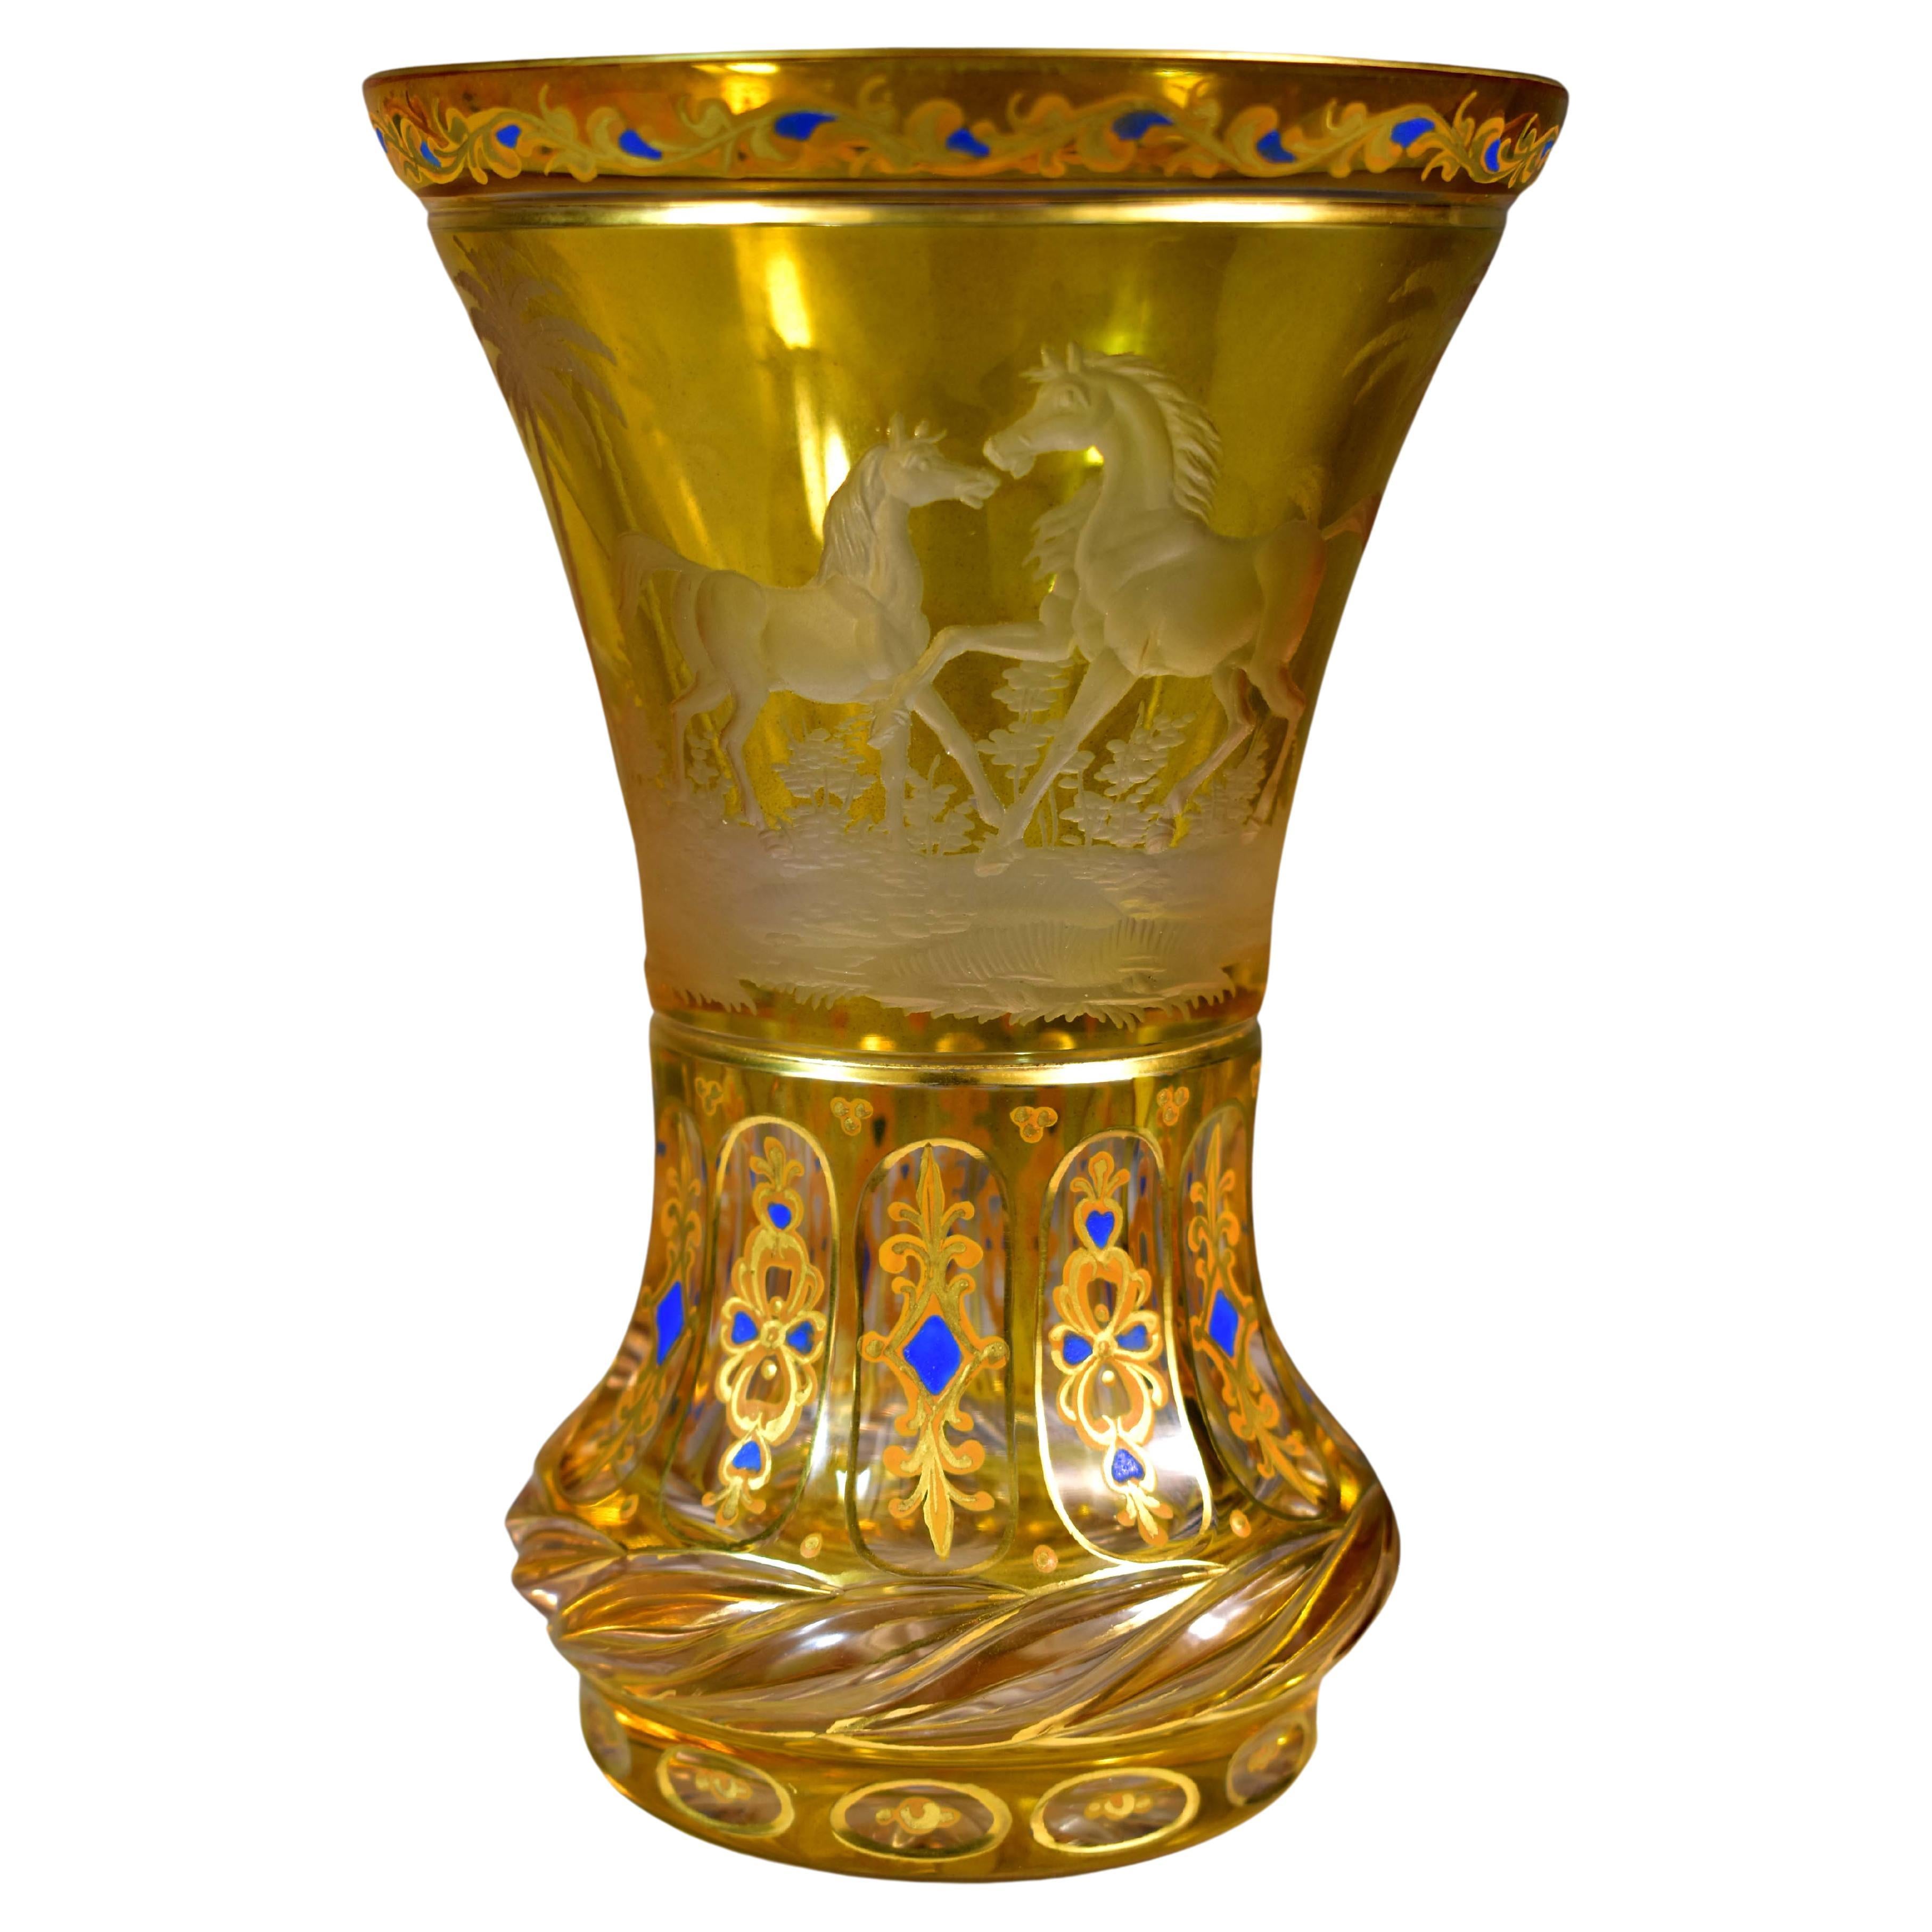 Glass Goblet-Engraved Horses-Hand Painted-Bohemian Glass 19-20th century